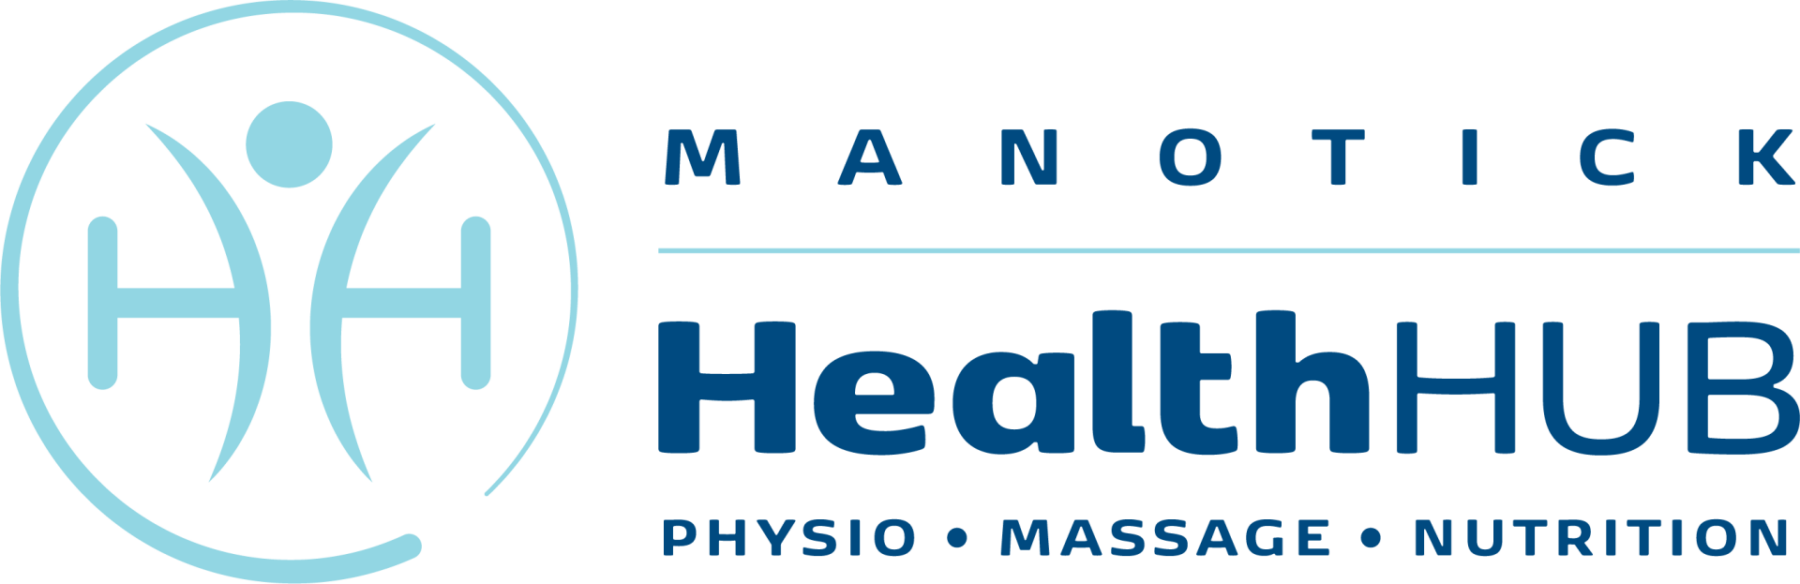 Health Hub Collective logo - Business in Manotick